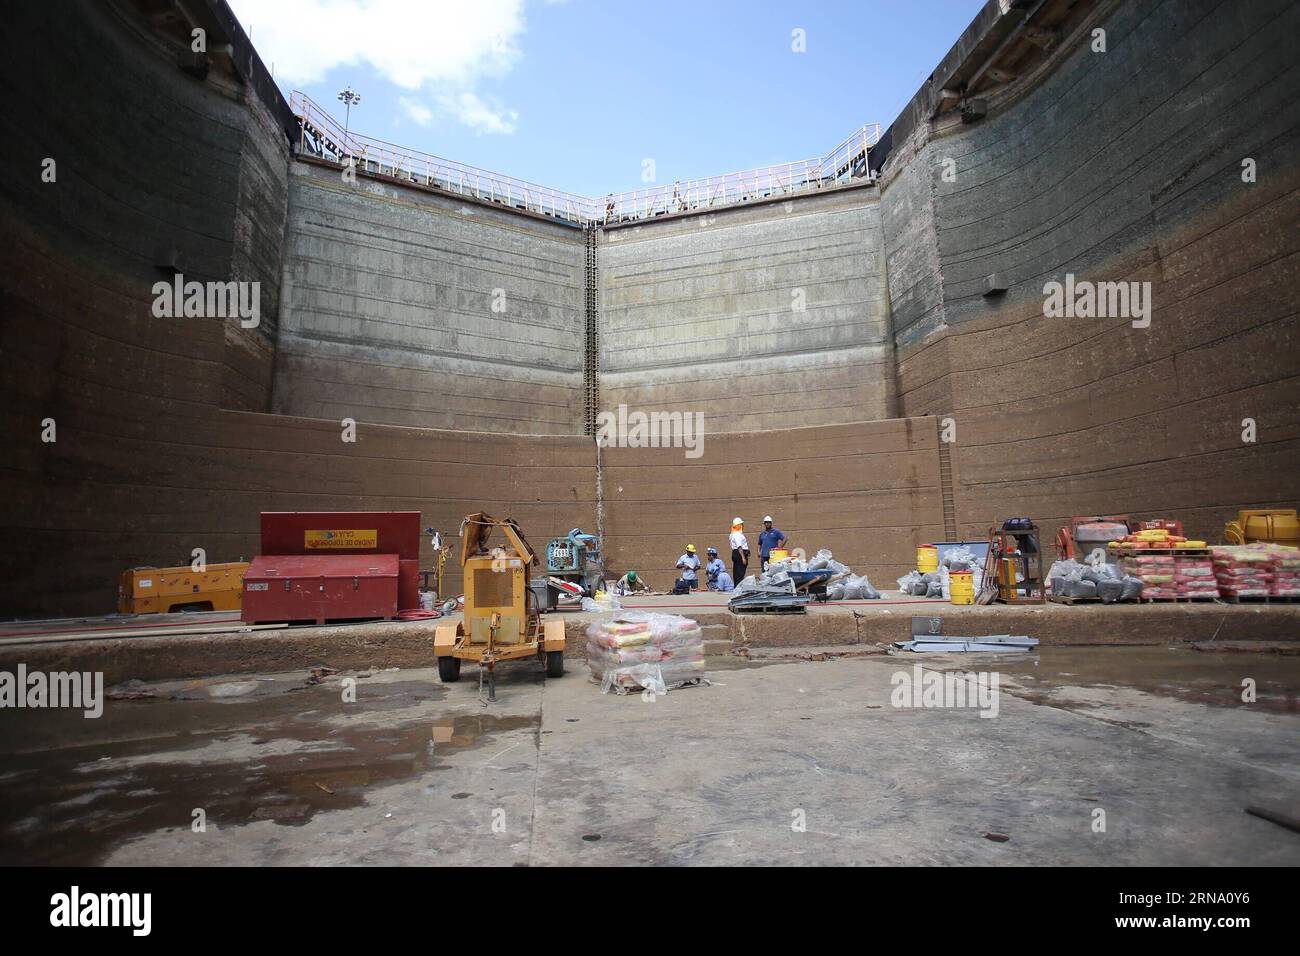 (151228) -- PANAMA CITY, Dec. 28, 2015 -- Workers are seen in the preventive maintenance of the floodgates of Pedro Miguel in Panama City, capital of Panama, on Dec. 28, 2015. According to local press, the administrator of the Authority of the Panama Canal, Jorge Luis Quijano, said that the preventive maintenance of the dry well of the floodgates of Pedro Miguel, located in the side of the Pacific, should end on Dec. 30. Mauricio Valenzuela) (da) (fnc) PANAMA-PANAMA CITY-PANAMA CANAL e MauricioxValenzuela PUBLICATIONxNOTxINxCHN   151228 Panama City DEC 28 2015 Workers are Lakes in The Preventi Stock Photo